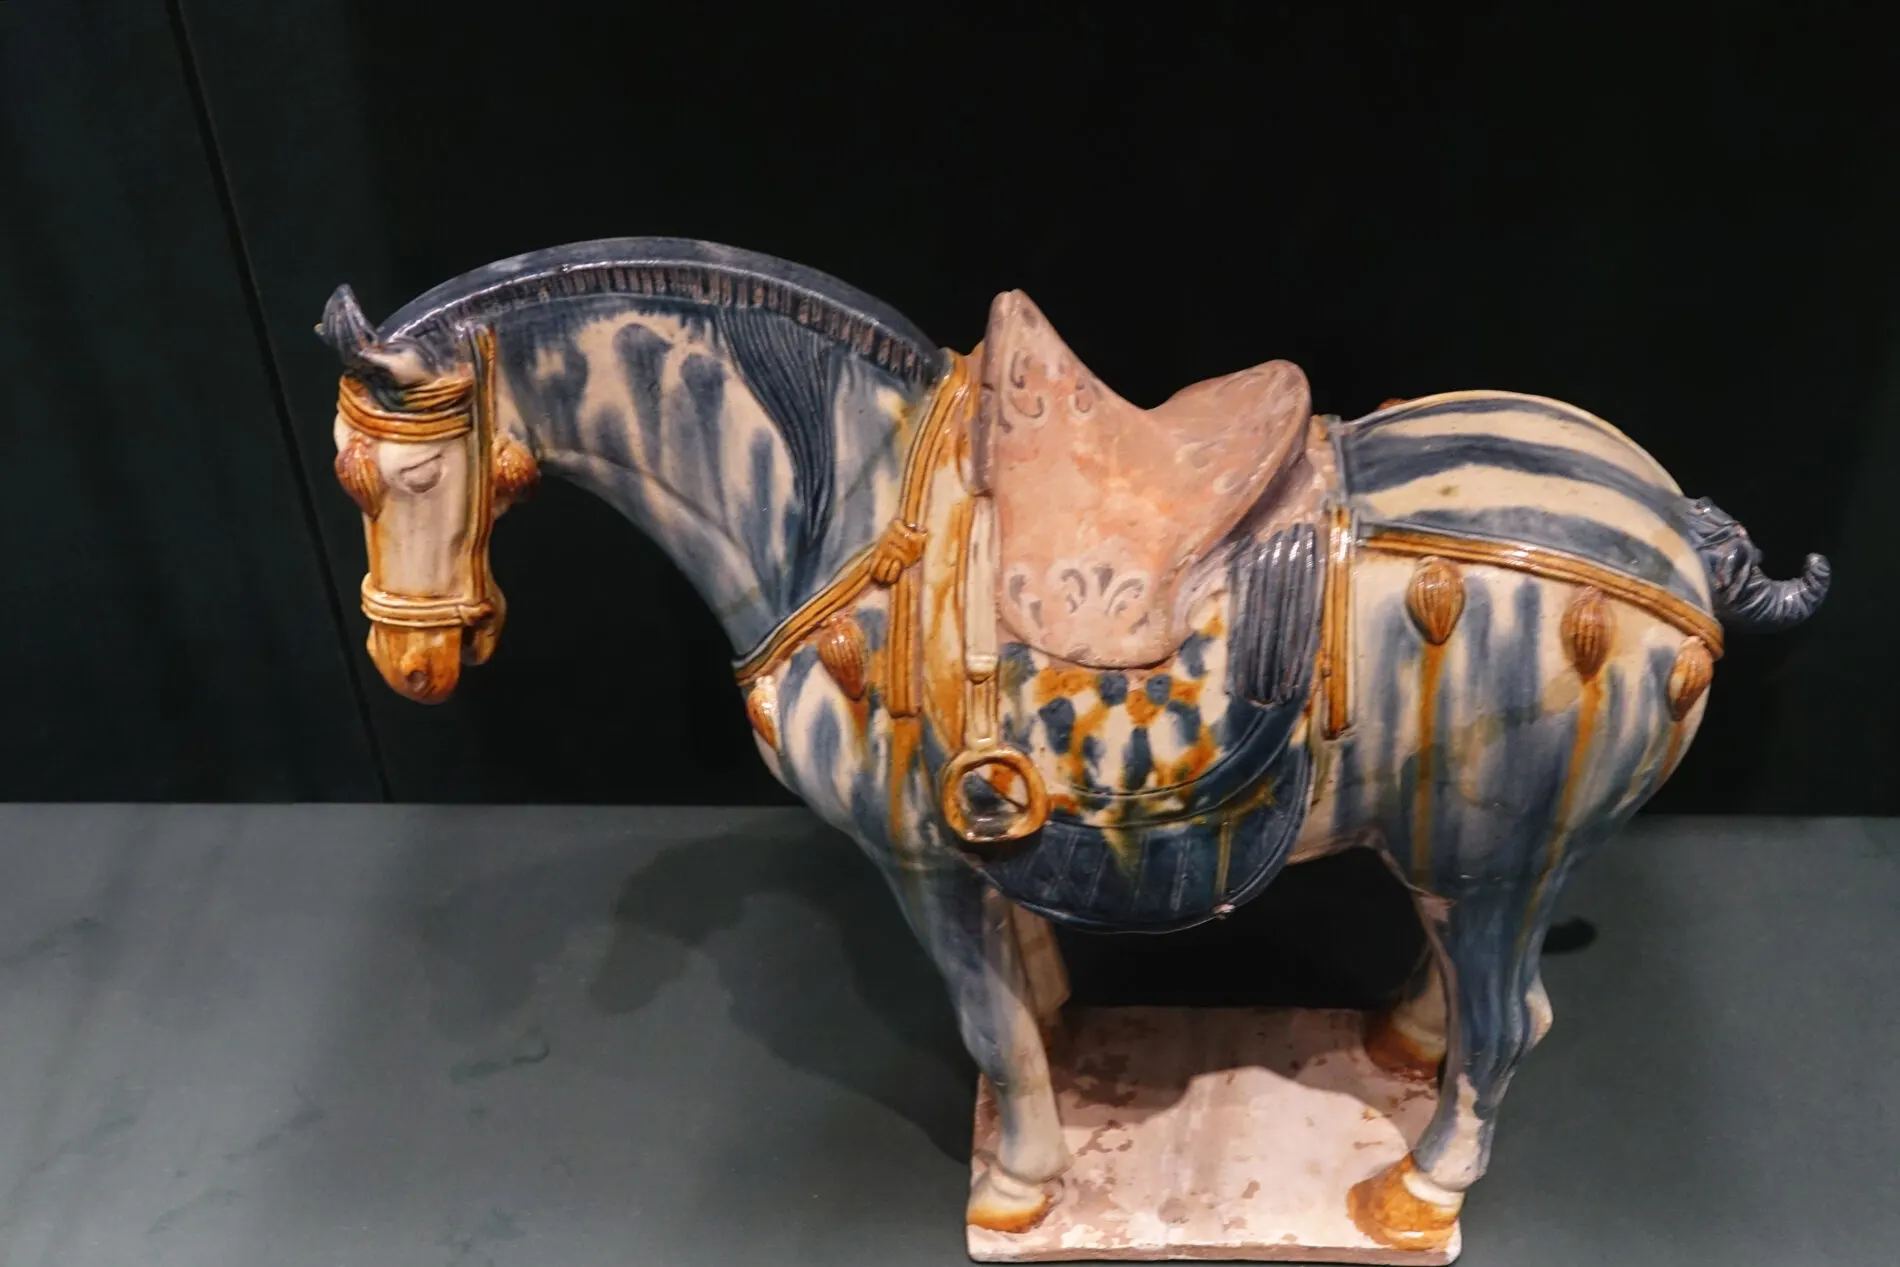 Ceramic horse in the Asian Art Museum in San Francisco. It is from the Tang Dynasty.